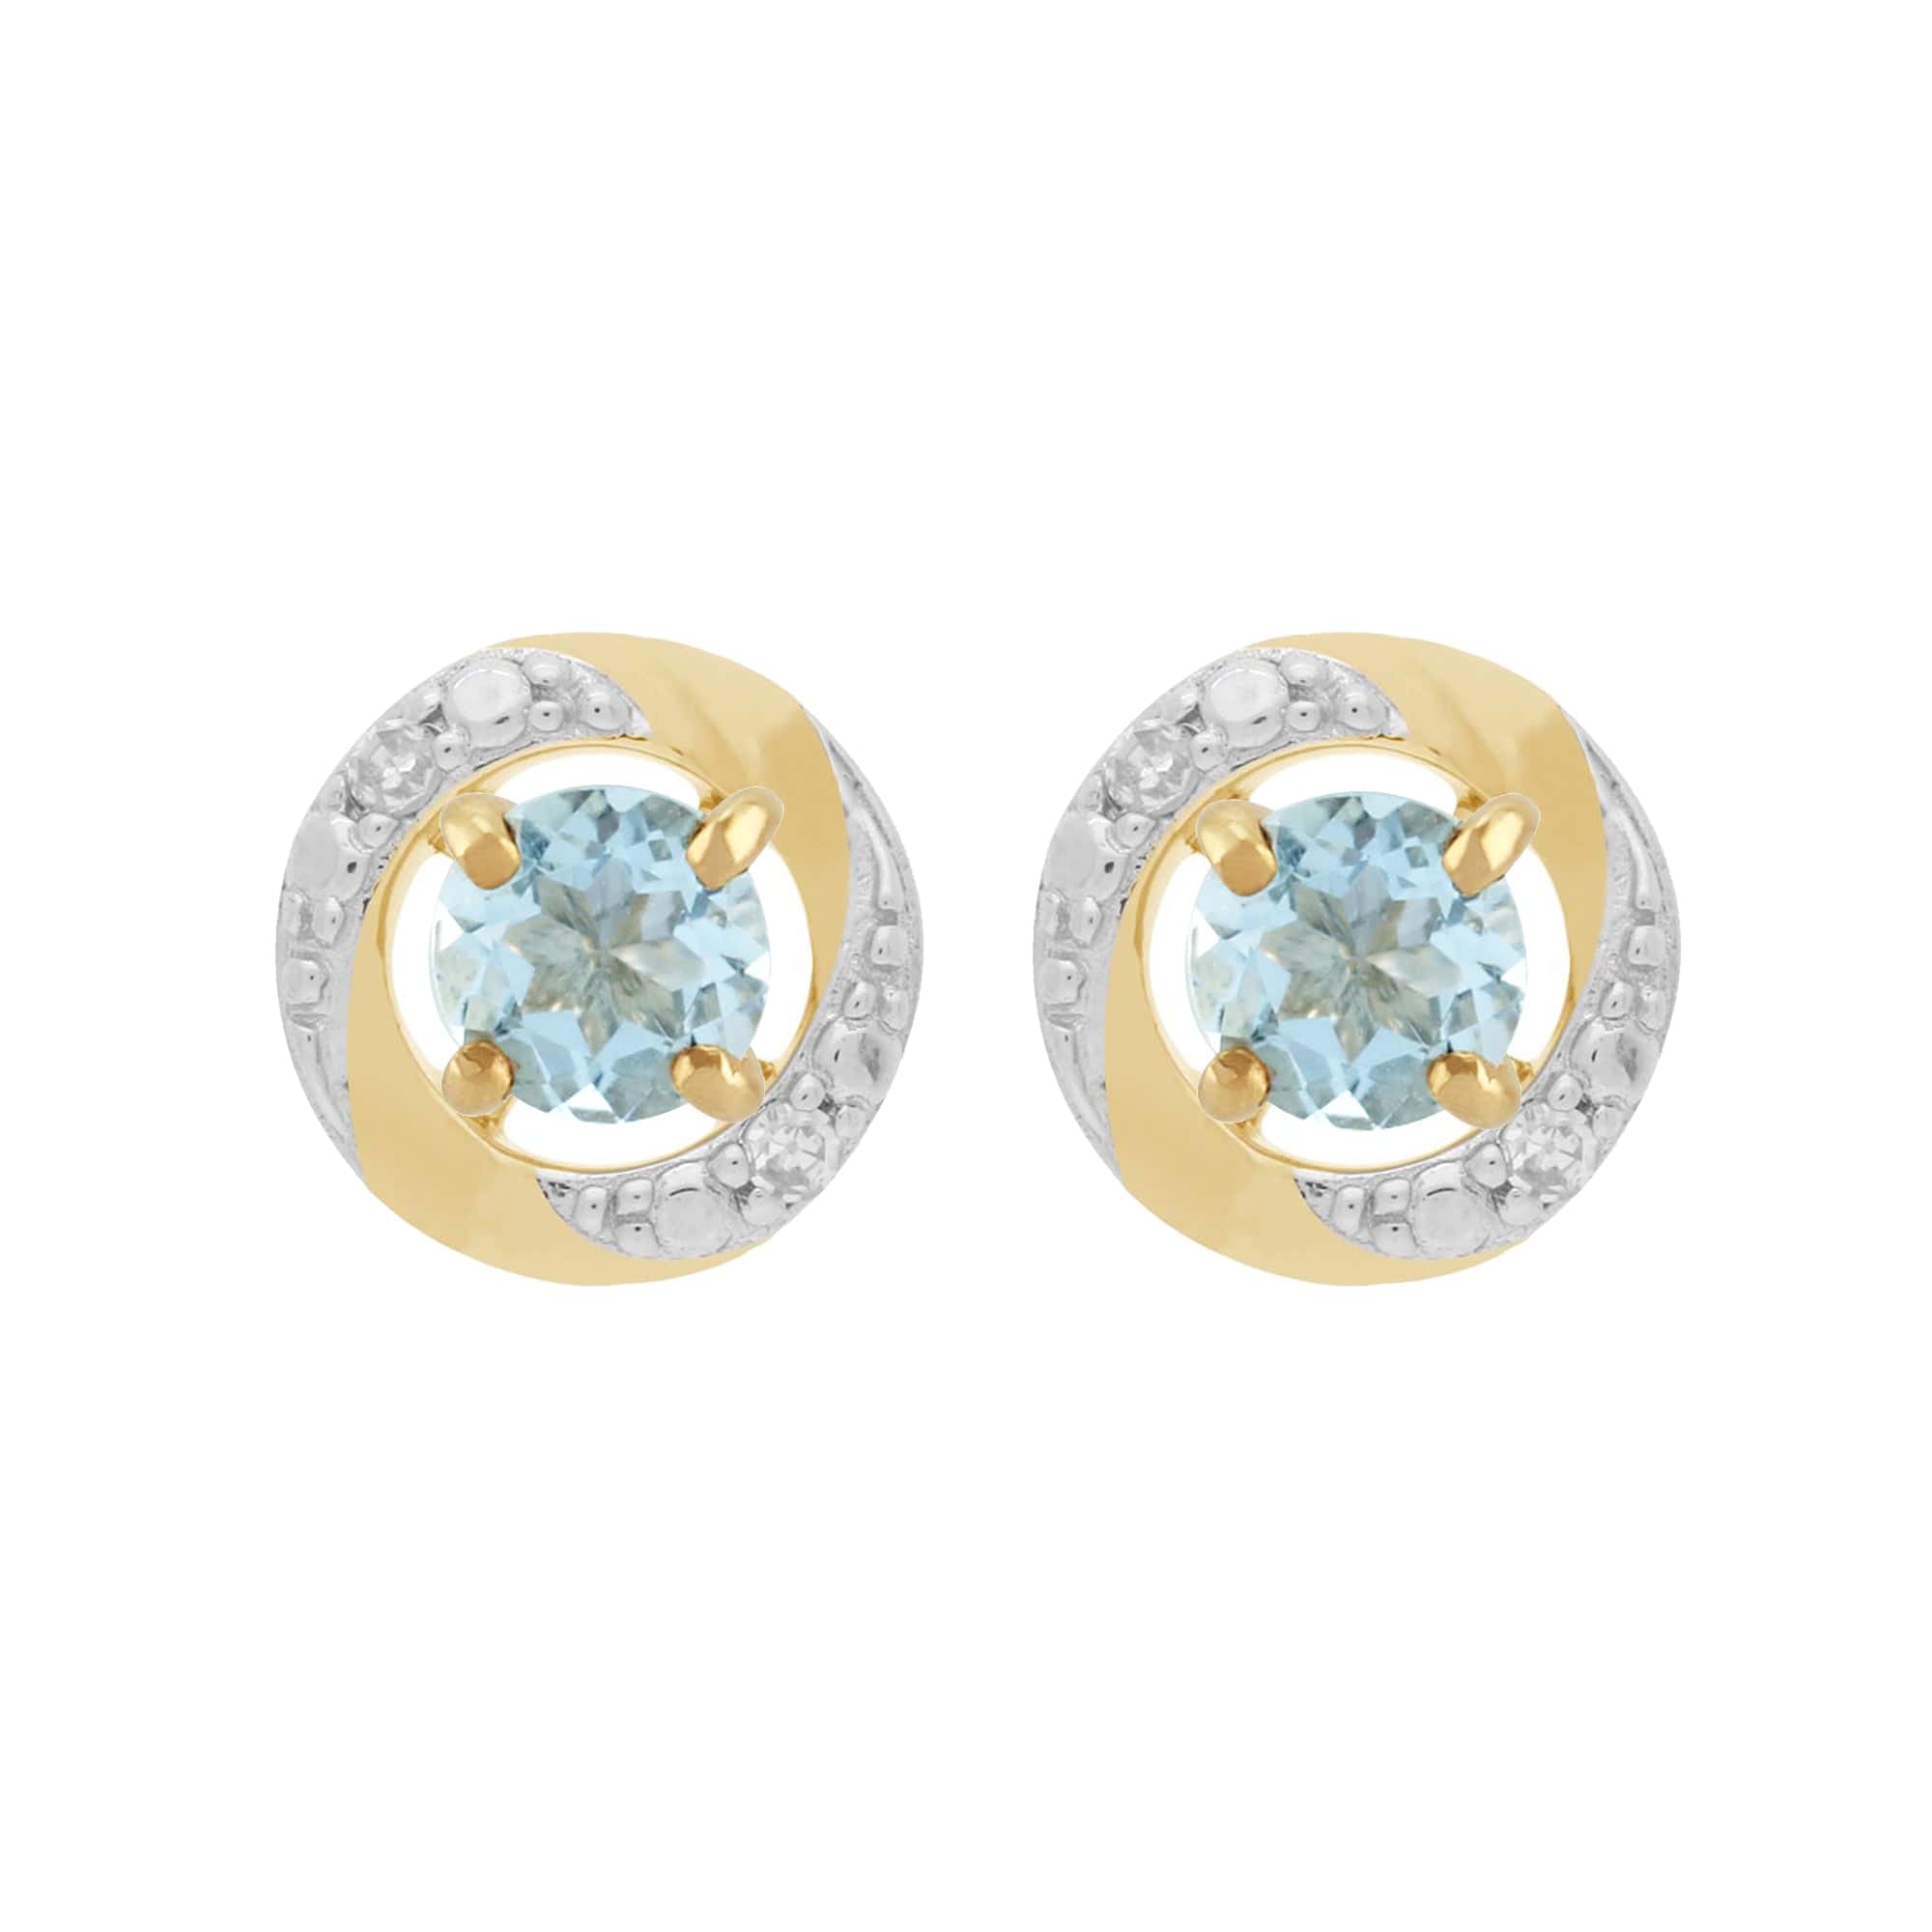 11567-191E0374019 Classic Round Aquamarine Stud Earrings with Detachable Diamond Halo Ear Jacket in 9ct Yellow Gold 1